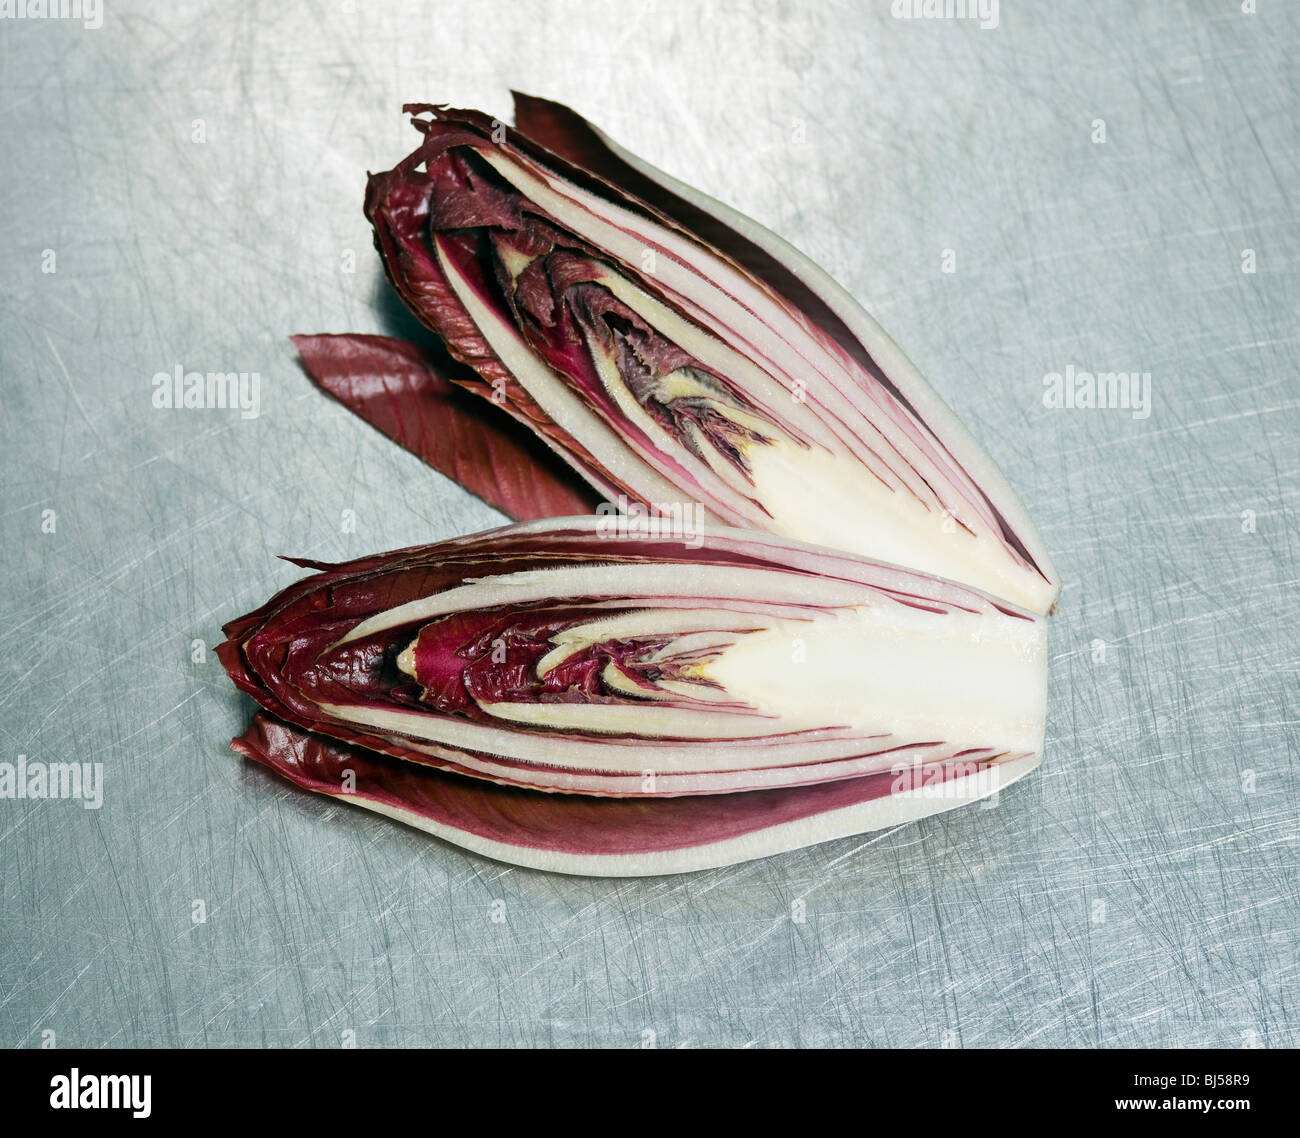 A small red cabbage cut in two pieces Stock Photo